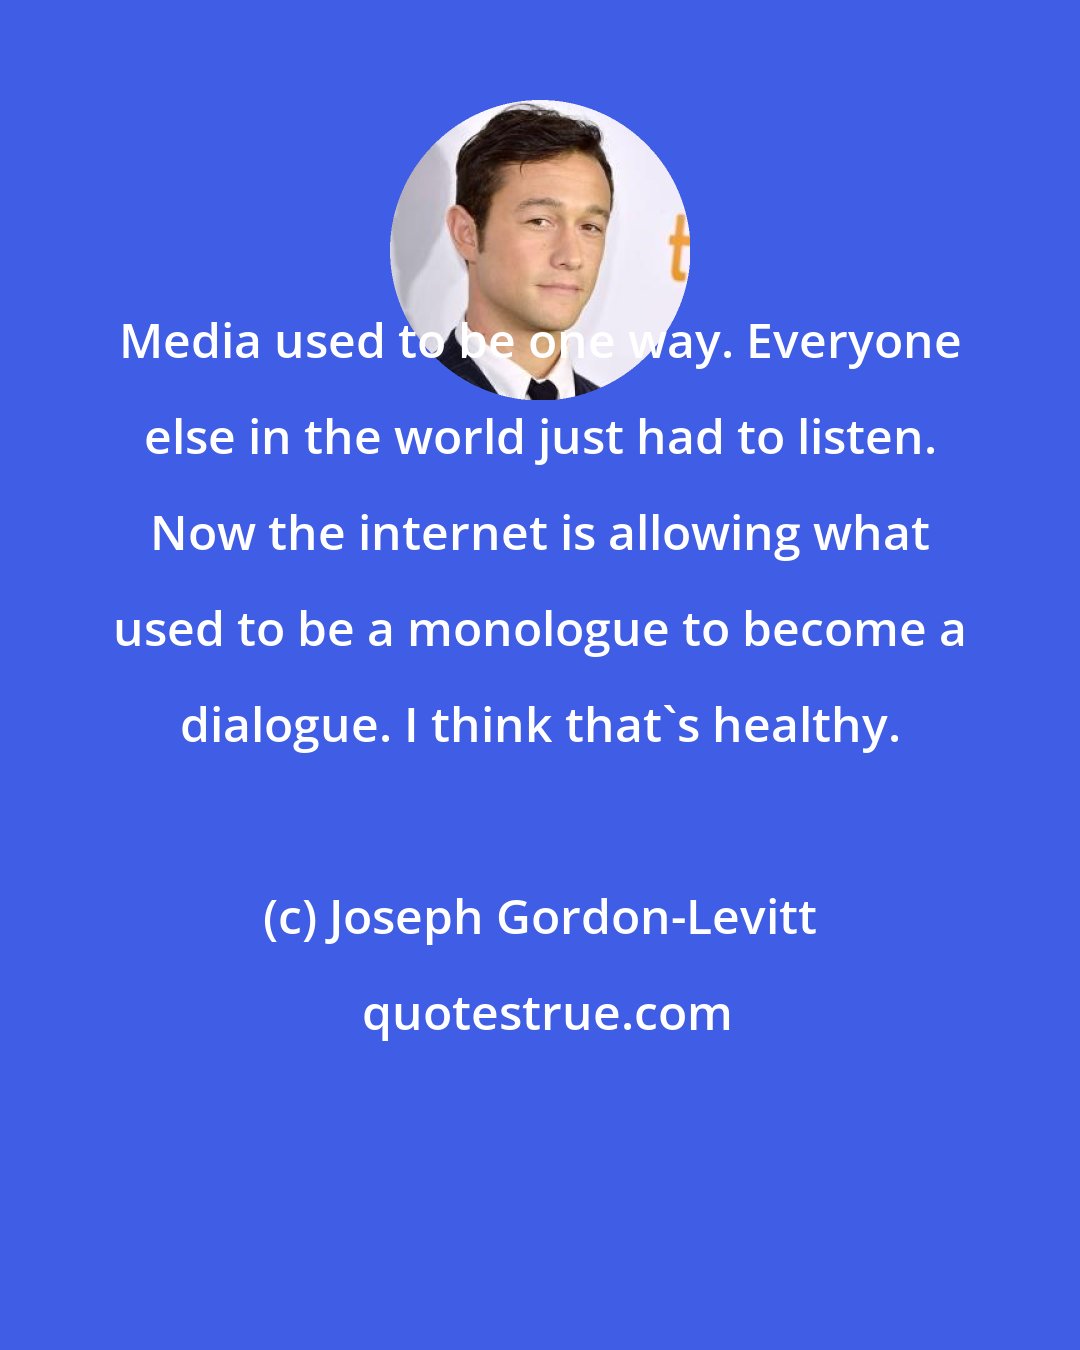 Joseph Gordon-Levitt: Media used to be one way. Everyone else in the world just had to listen. Now the internet is allowing what used to be a monologue to become a dialogue. I think that's healthy.